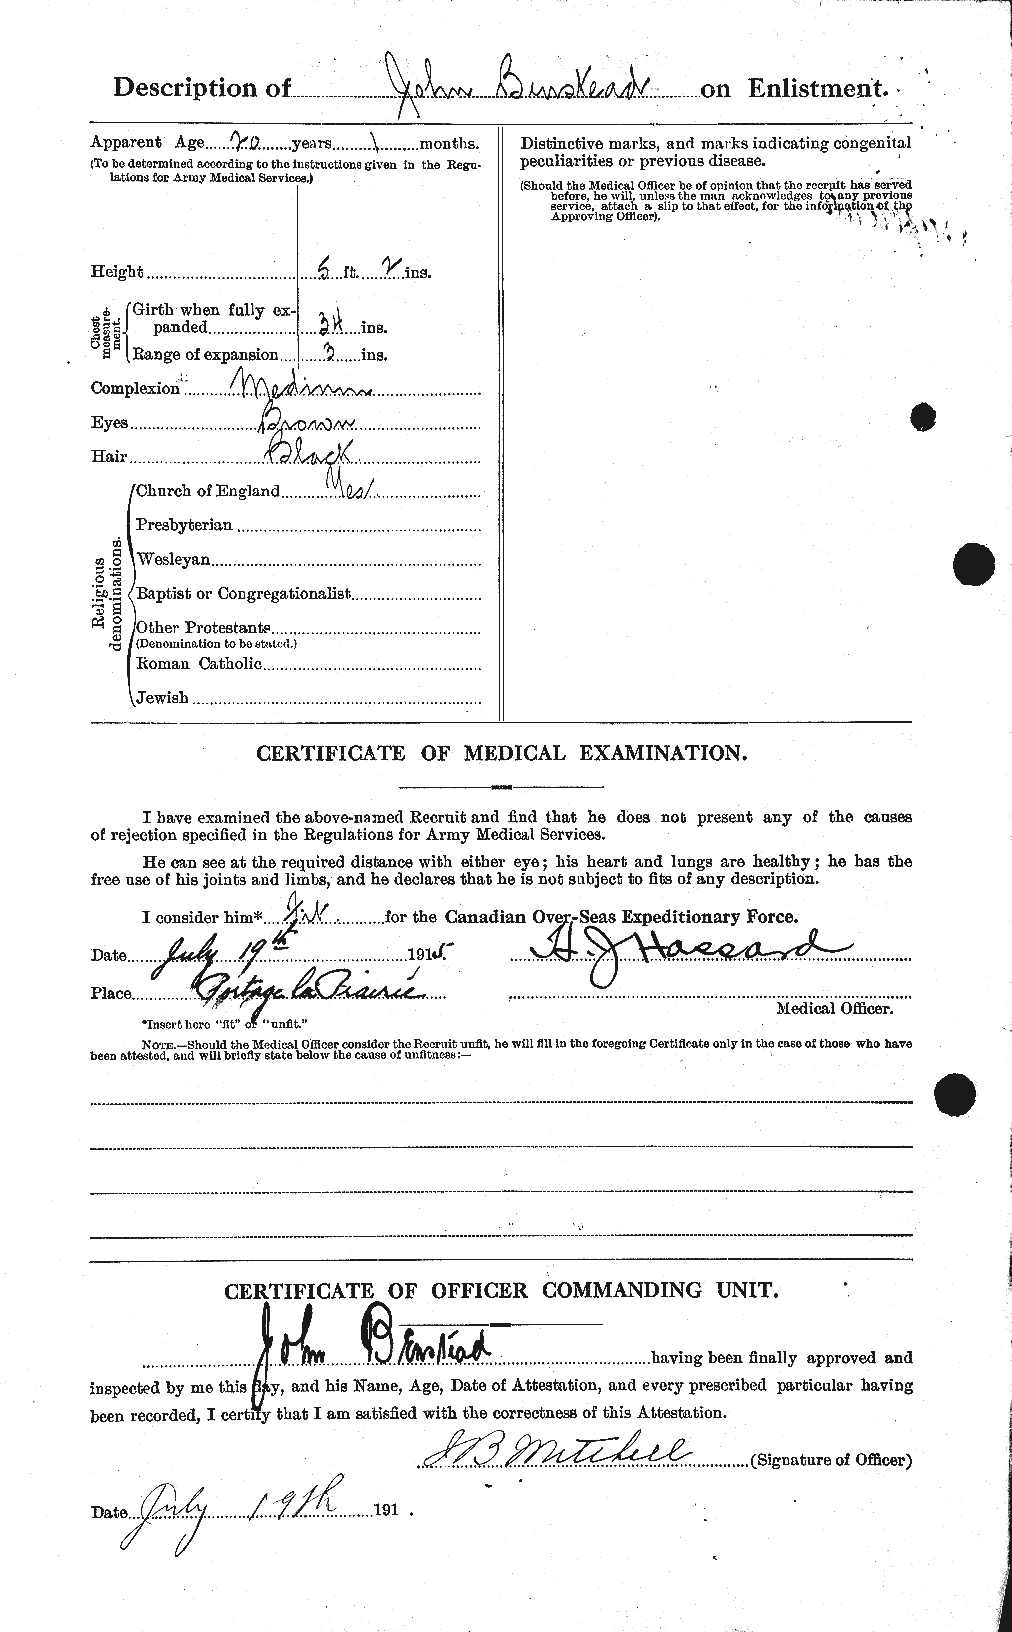 Personnel Records of the First World War - CEF 238054b